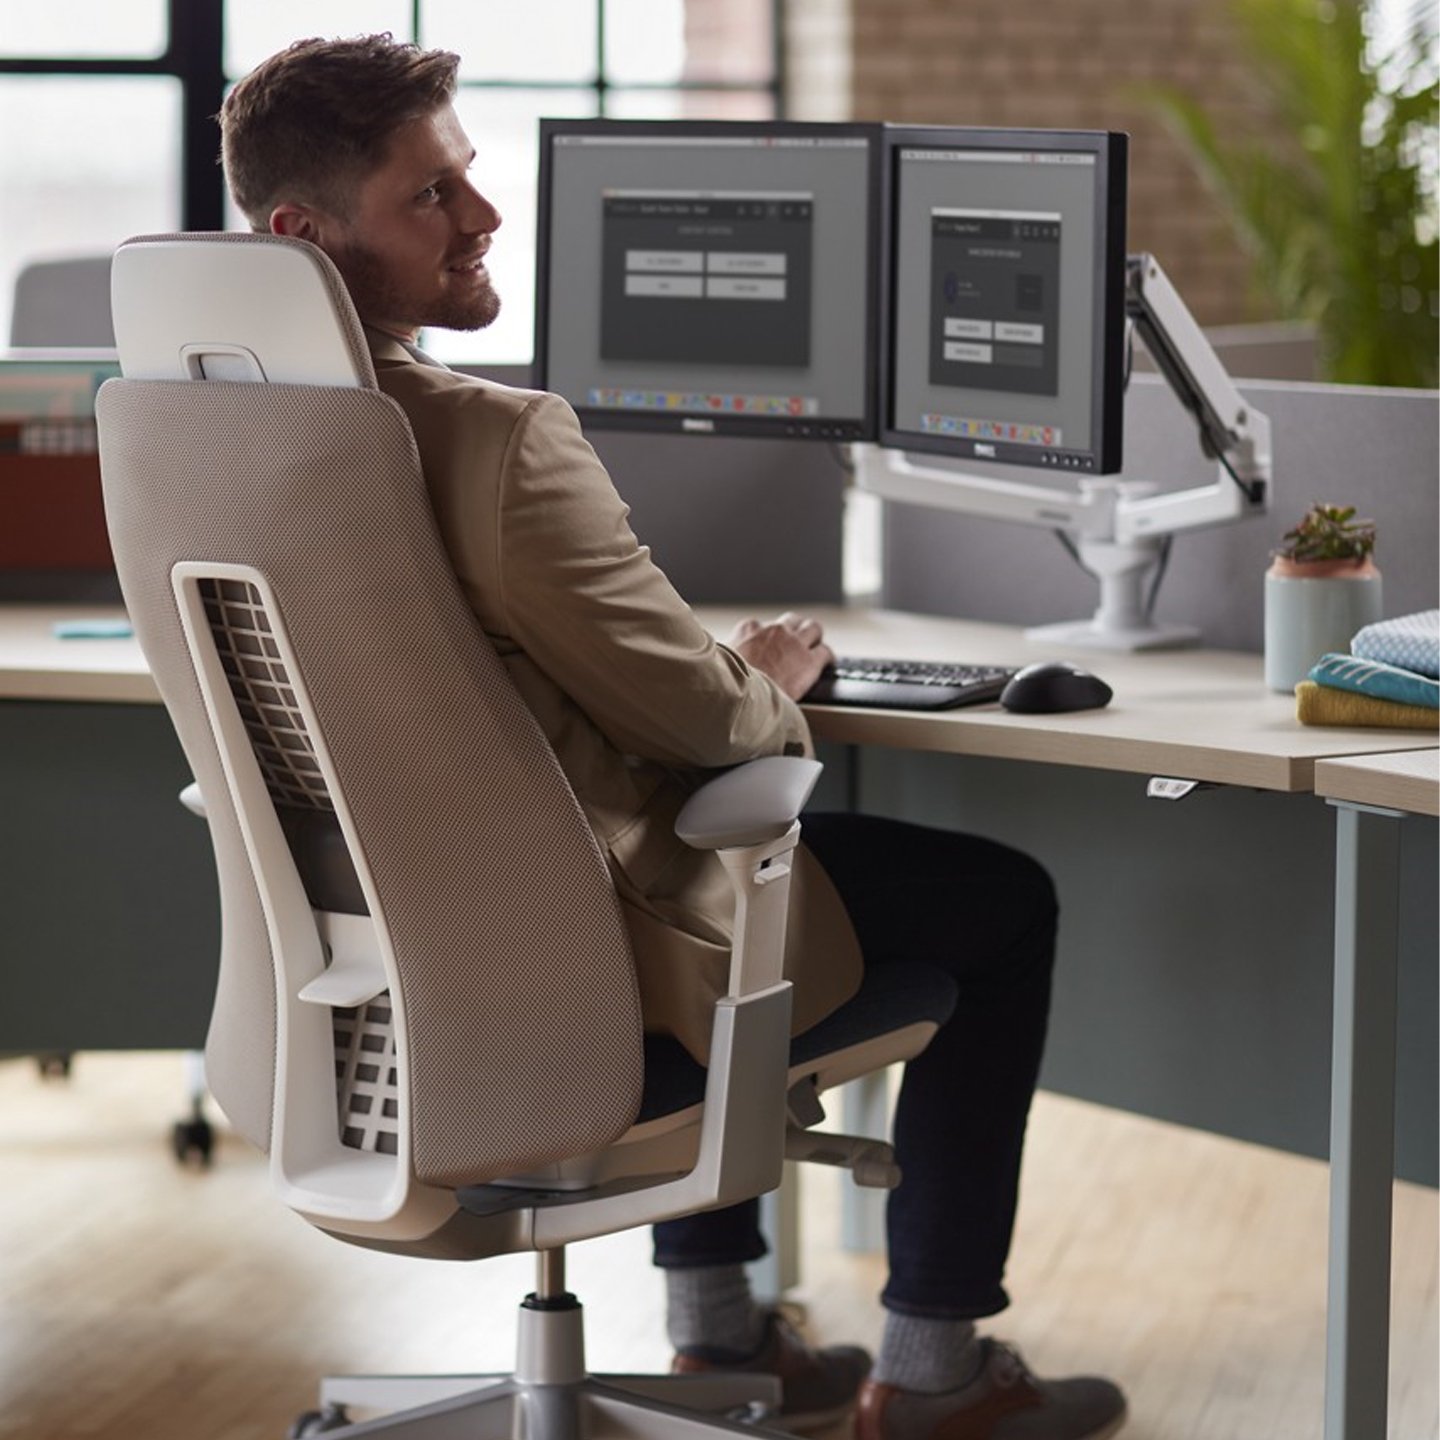 Haworth Fern Executive Task chair at a workstation in a office room 